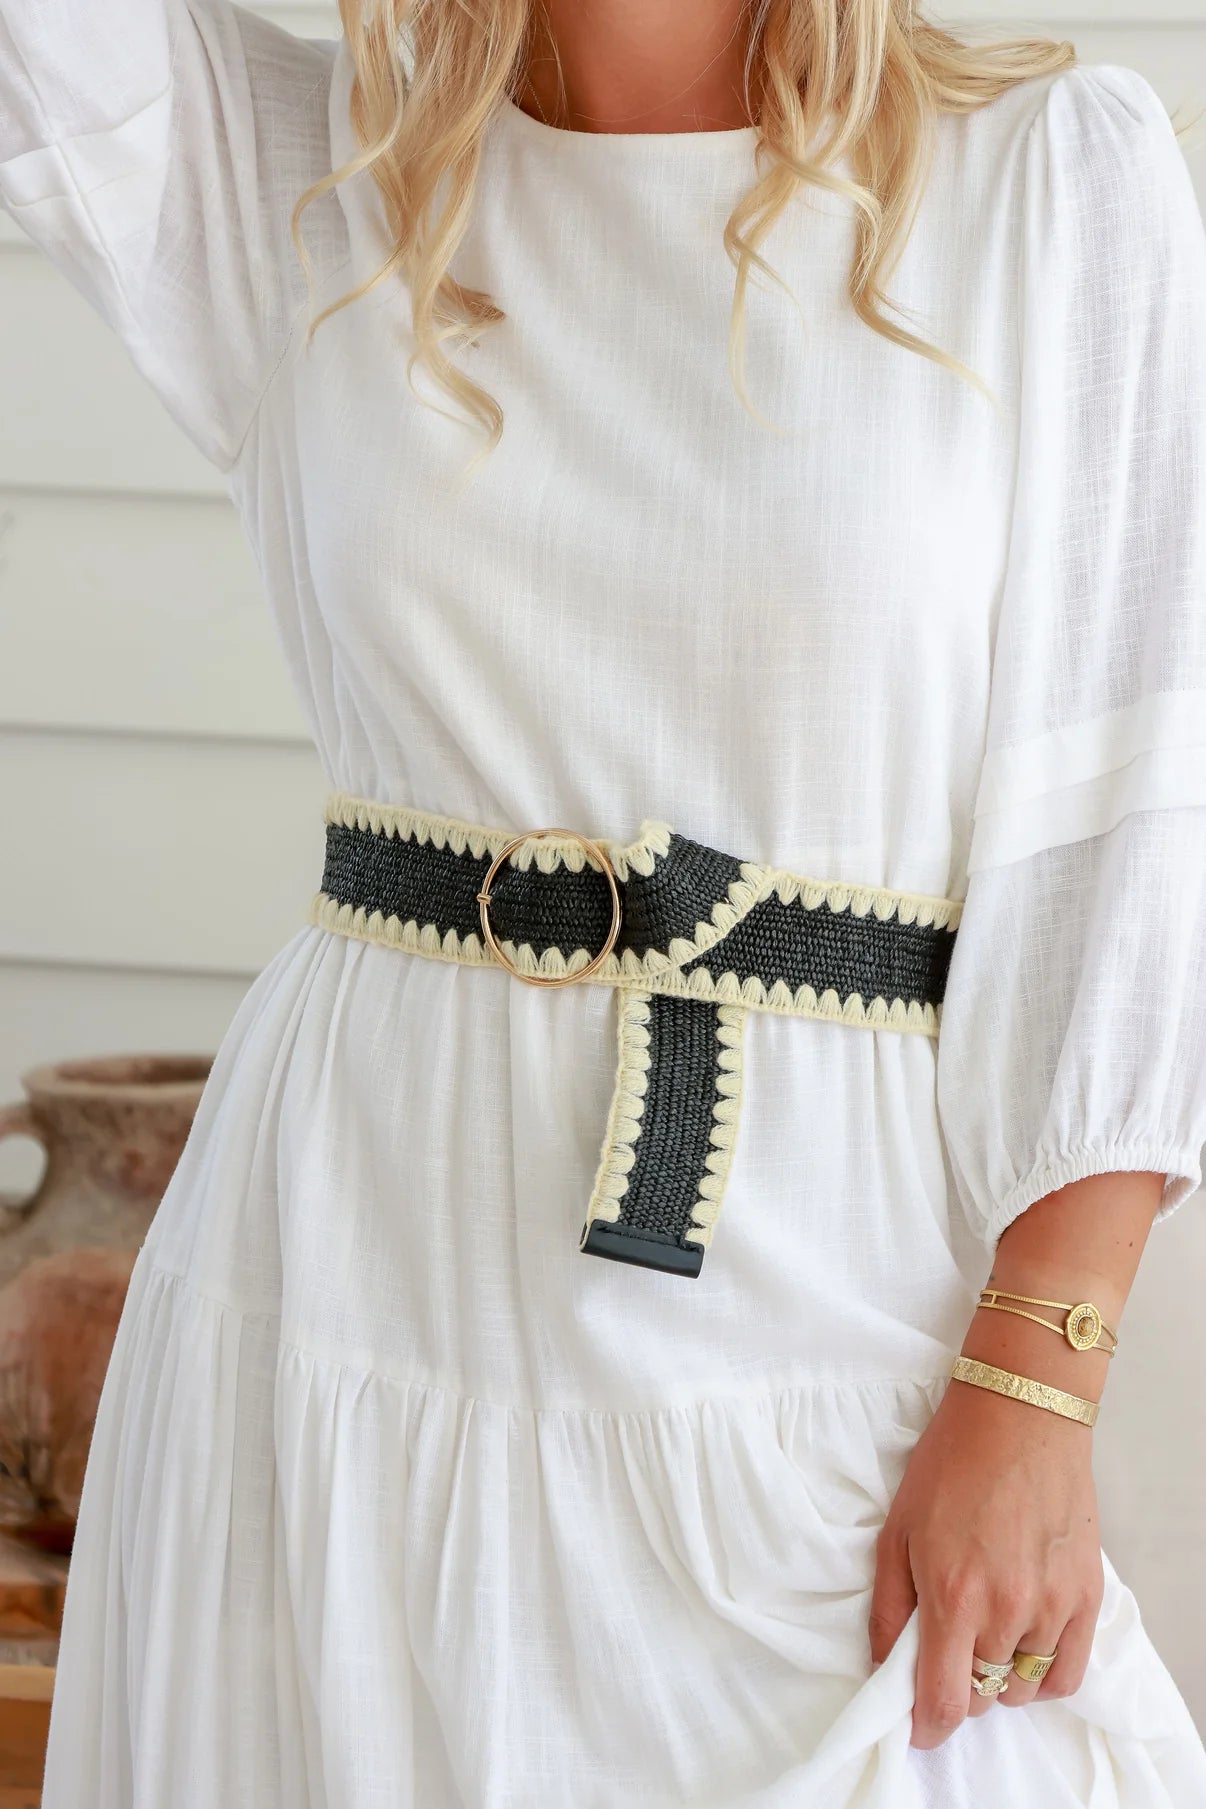 scallop edge woven belt in black and natural with gold round metal buckle